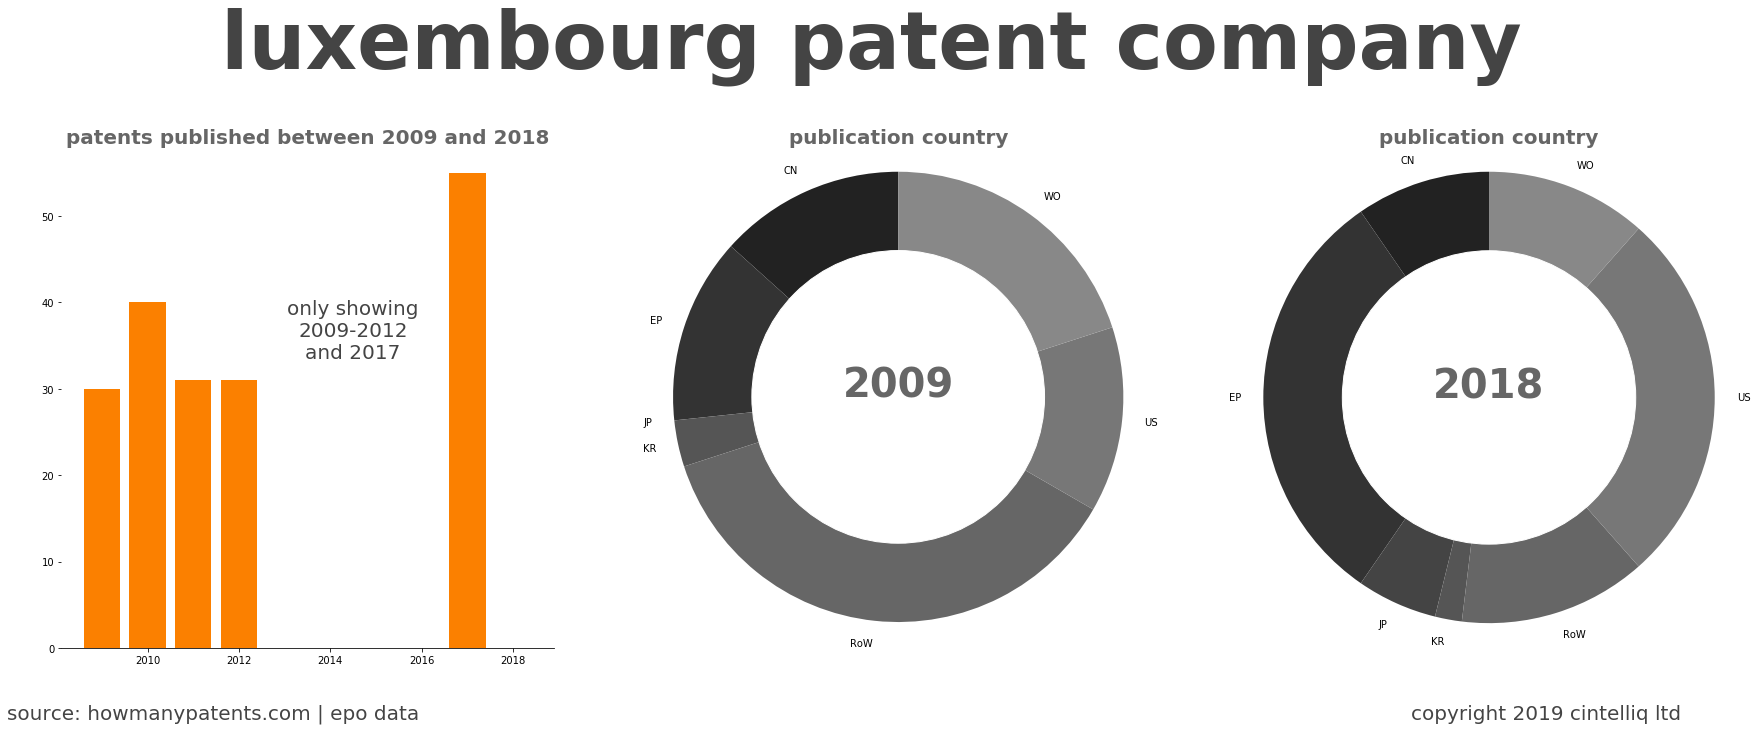 summary of patents for Luxembourg Patent Company